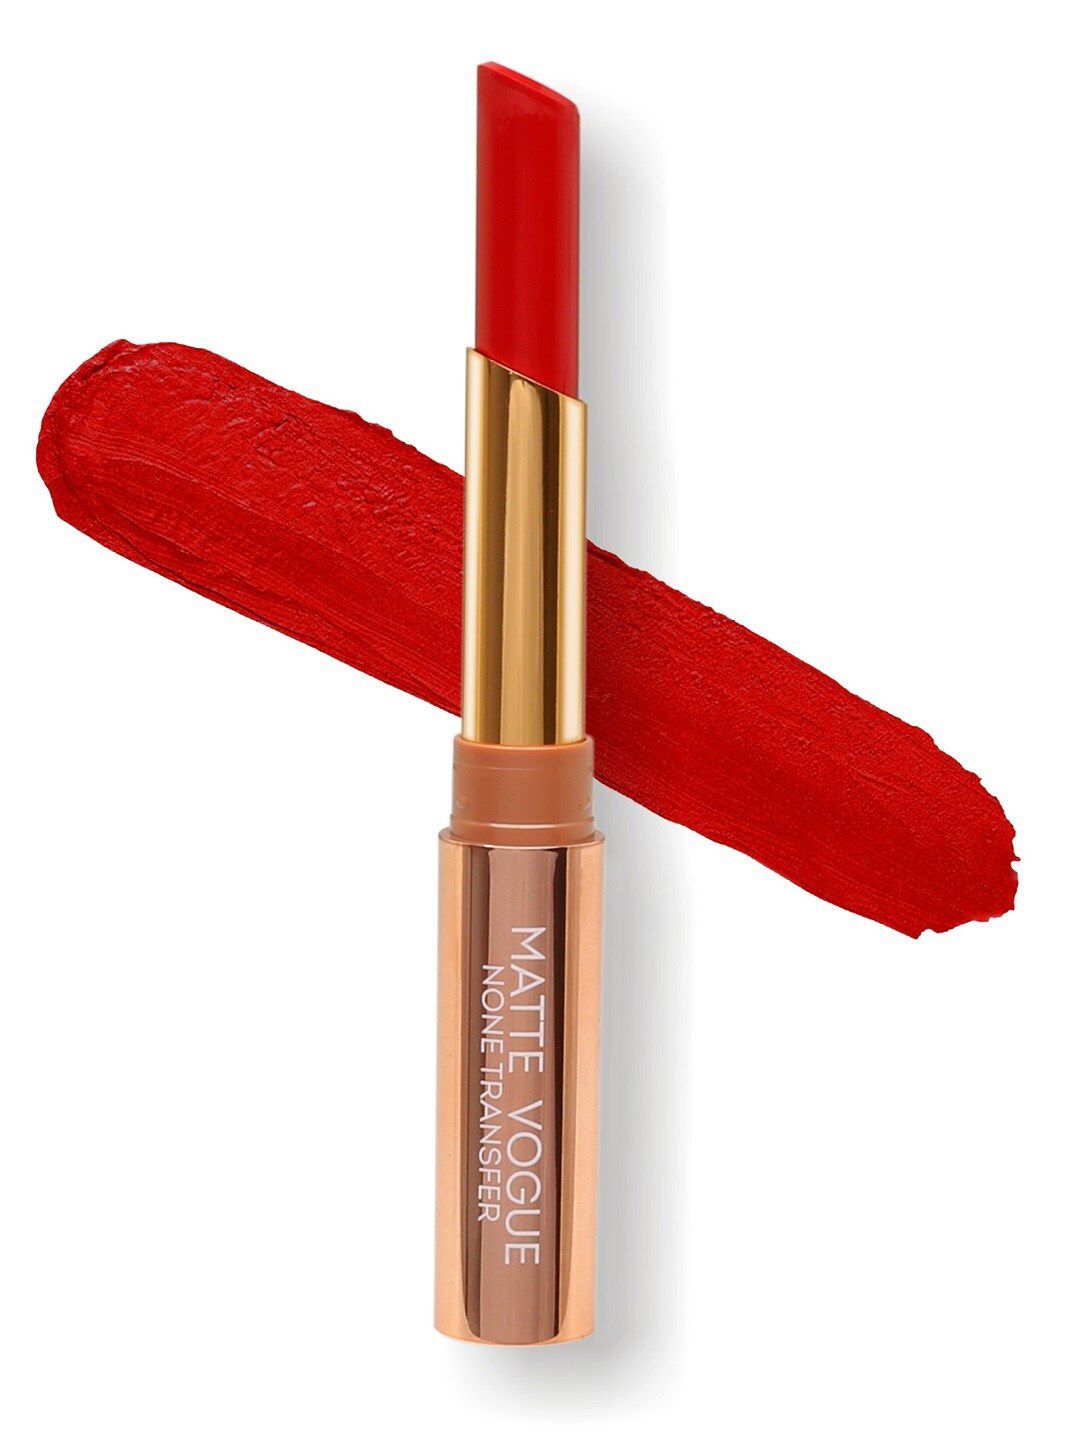 ME-ON Matte Vogue Lipstick Shade 01 - Flaming Kiss Price in India